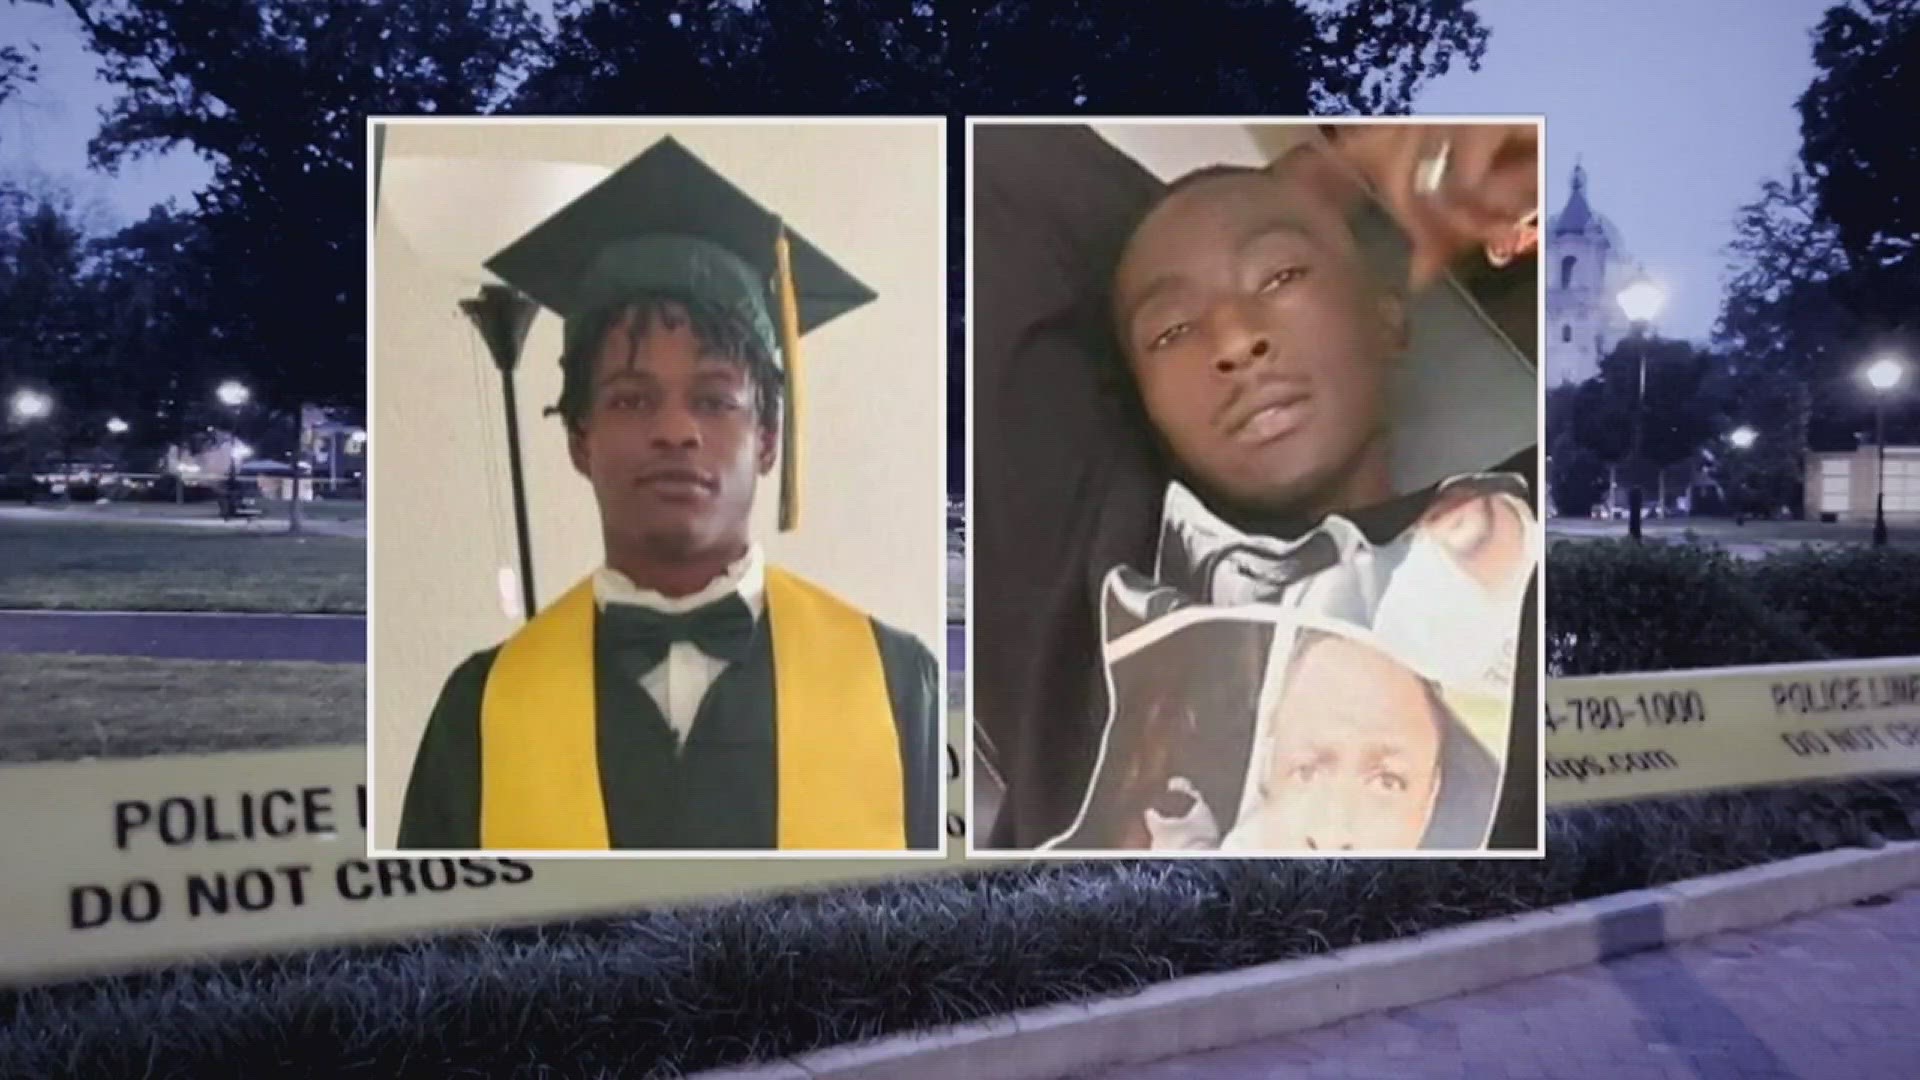 Police believe the 19-year-old suspect knew at least one of the victims shot after the graduation ceremony in Richmond, Virginia.